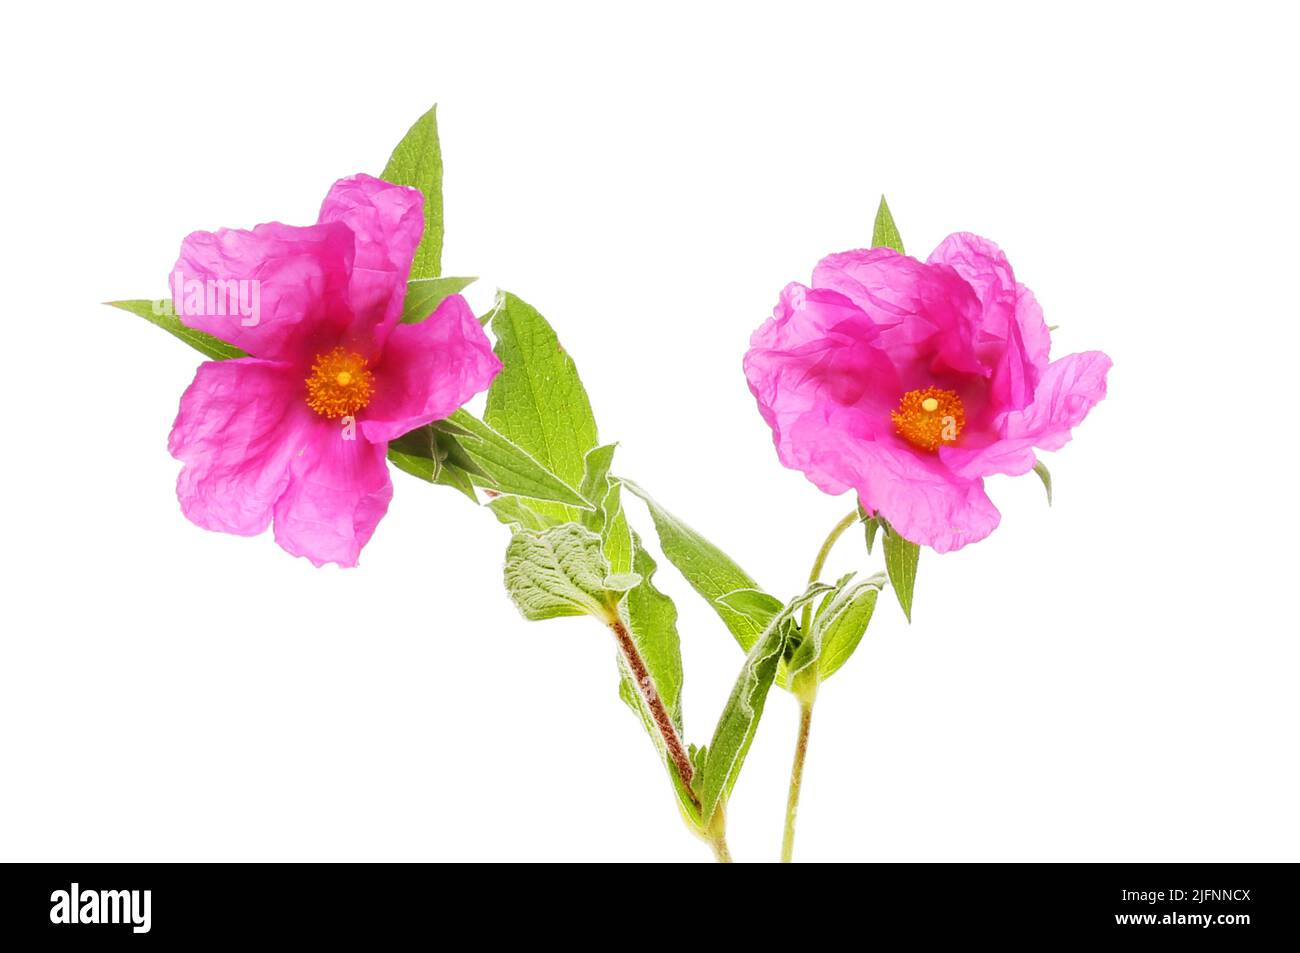 Two cistus flowers and foliage isolated against white Stock Photo